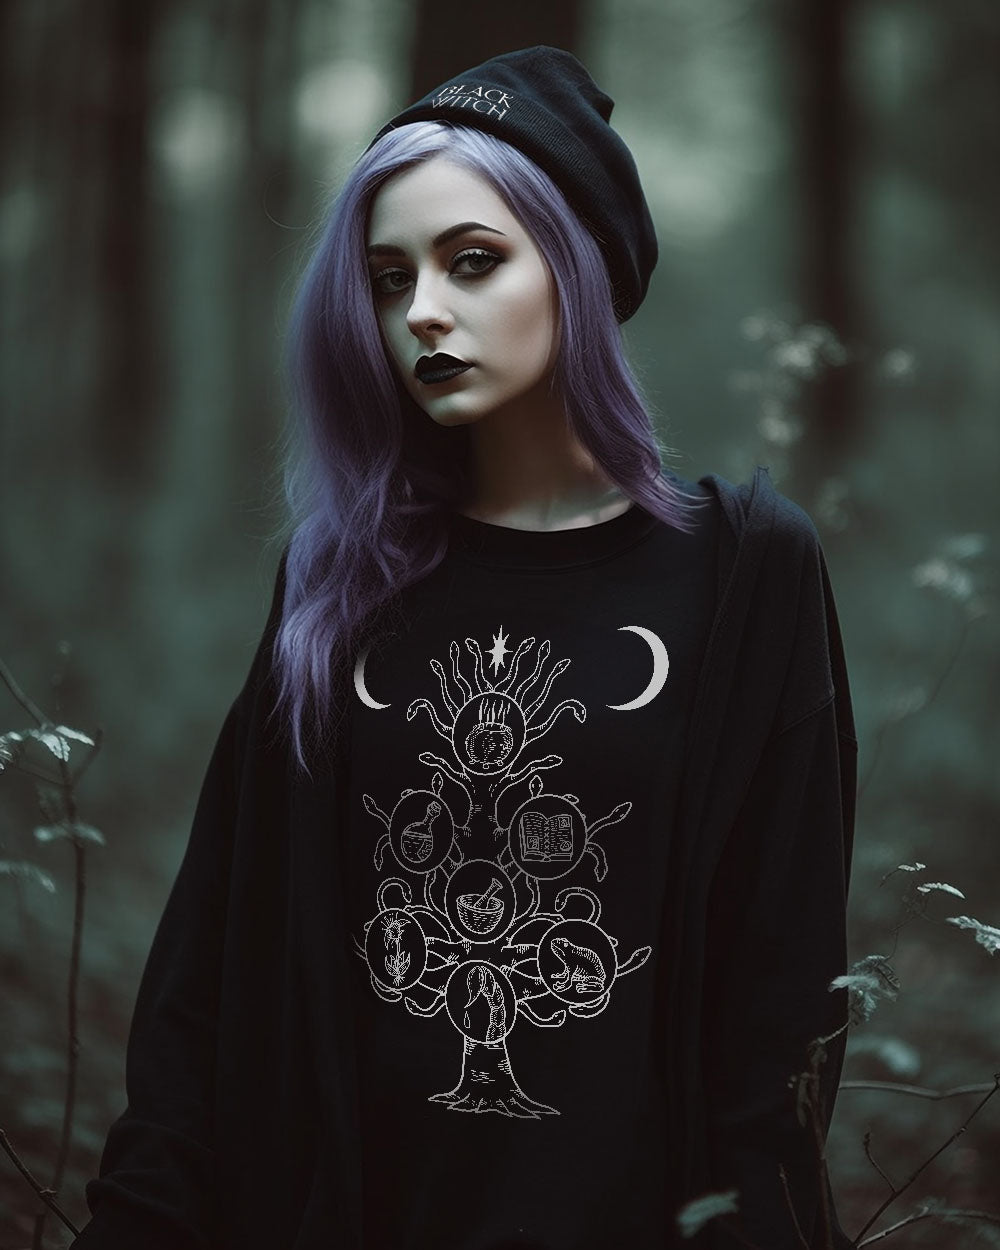 Tree of Life Long Sleeve Unisex Tee: Witchy Pagan Gothic Clothing - Alternative Occult Vegan - On Demand Eco-friendly Sustainable Fashion